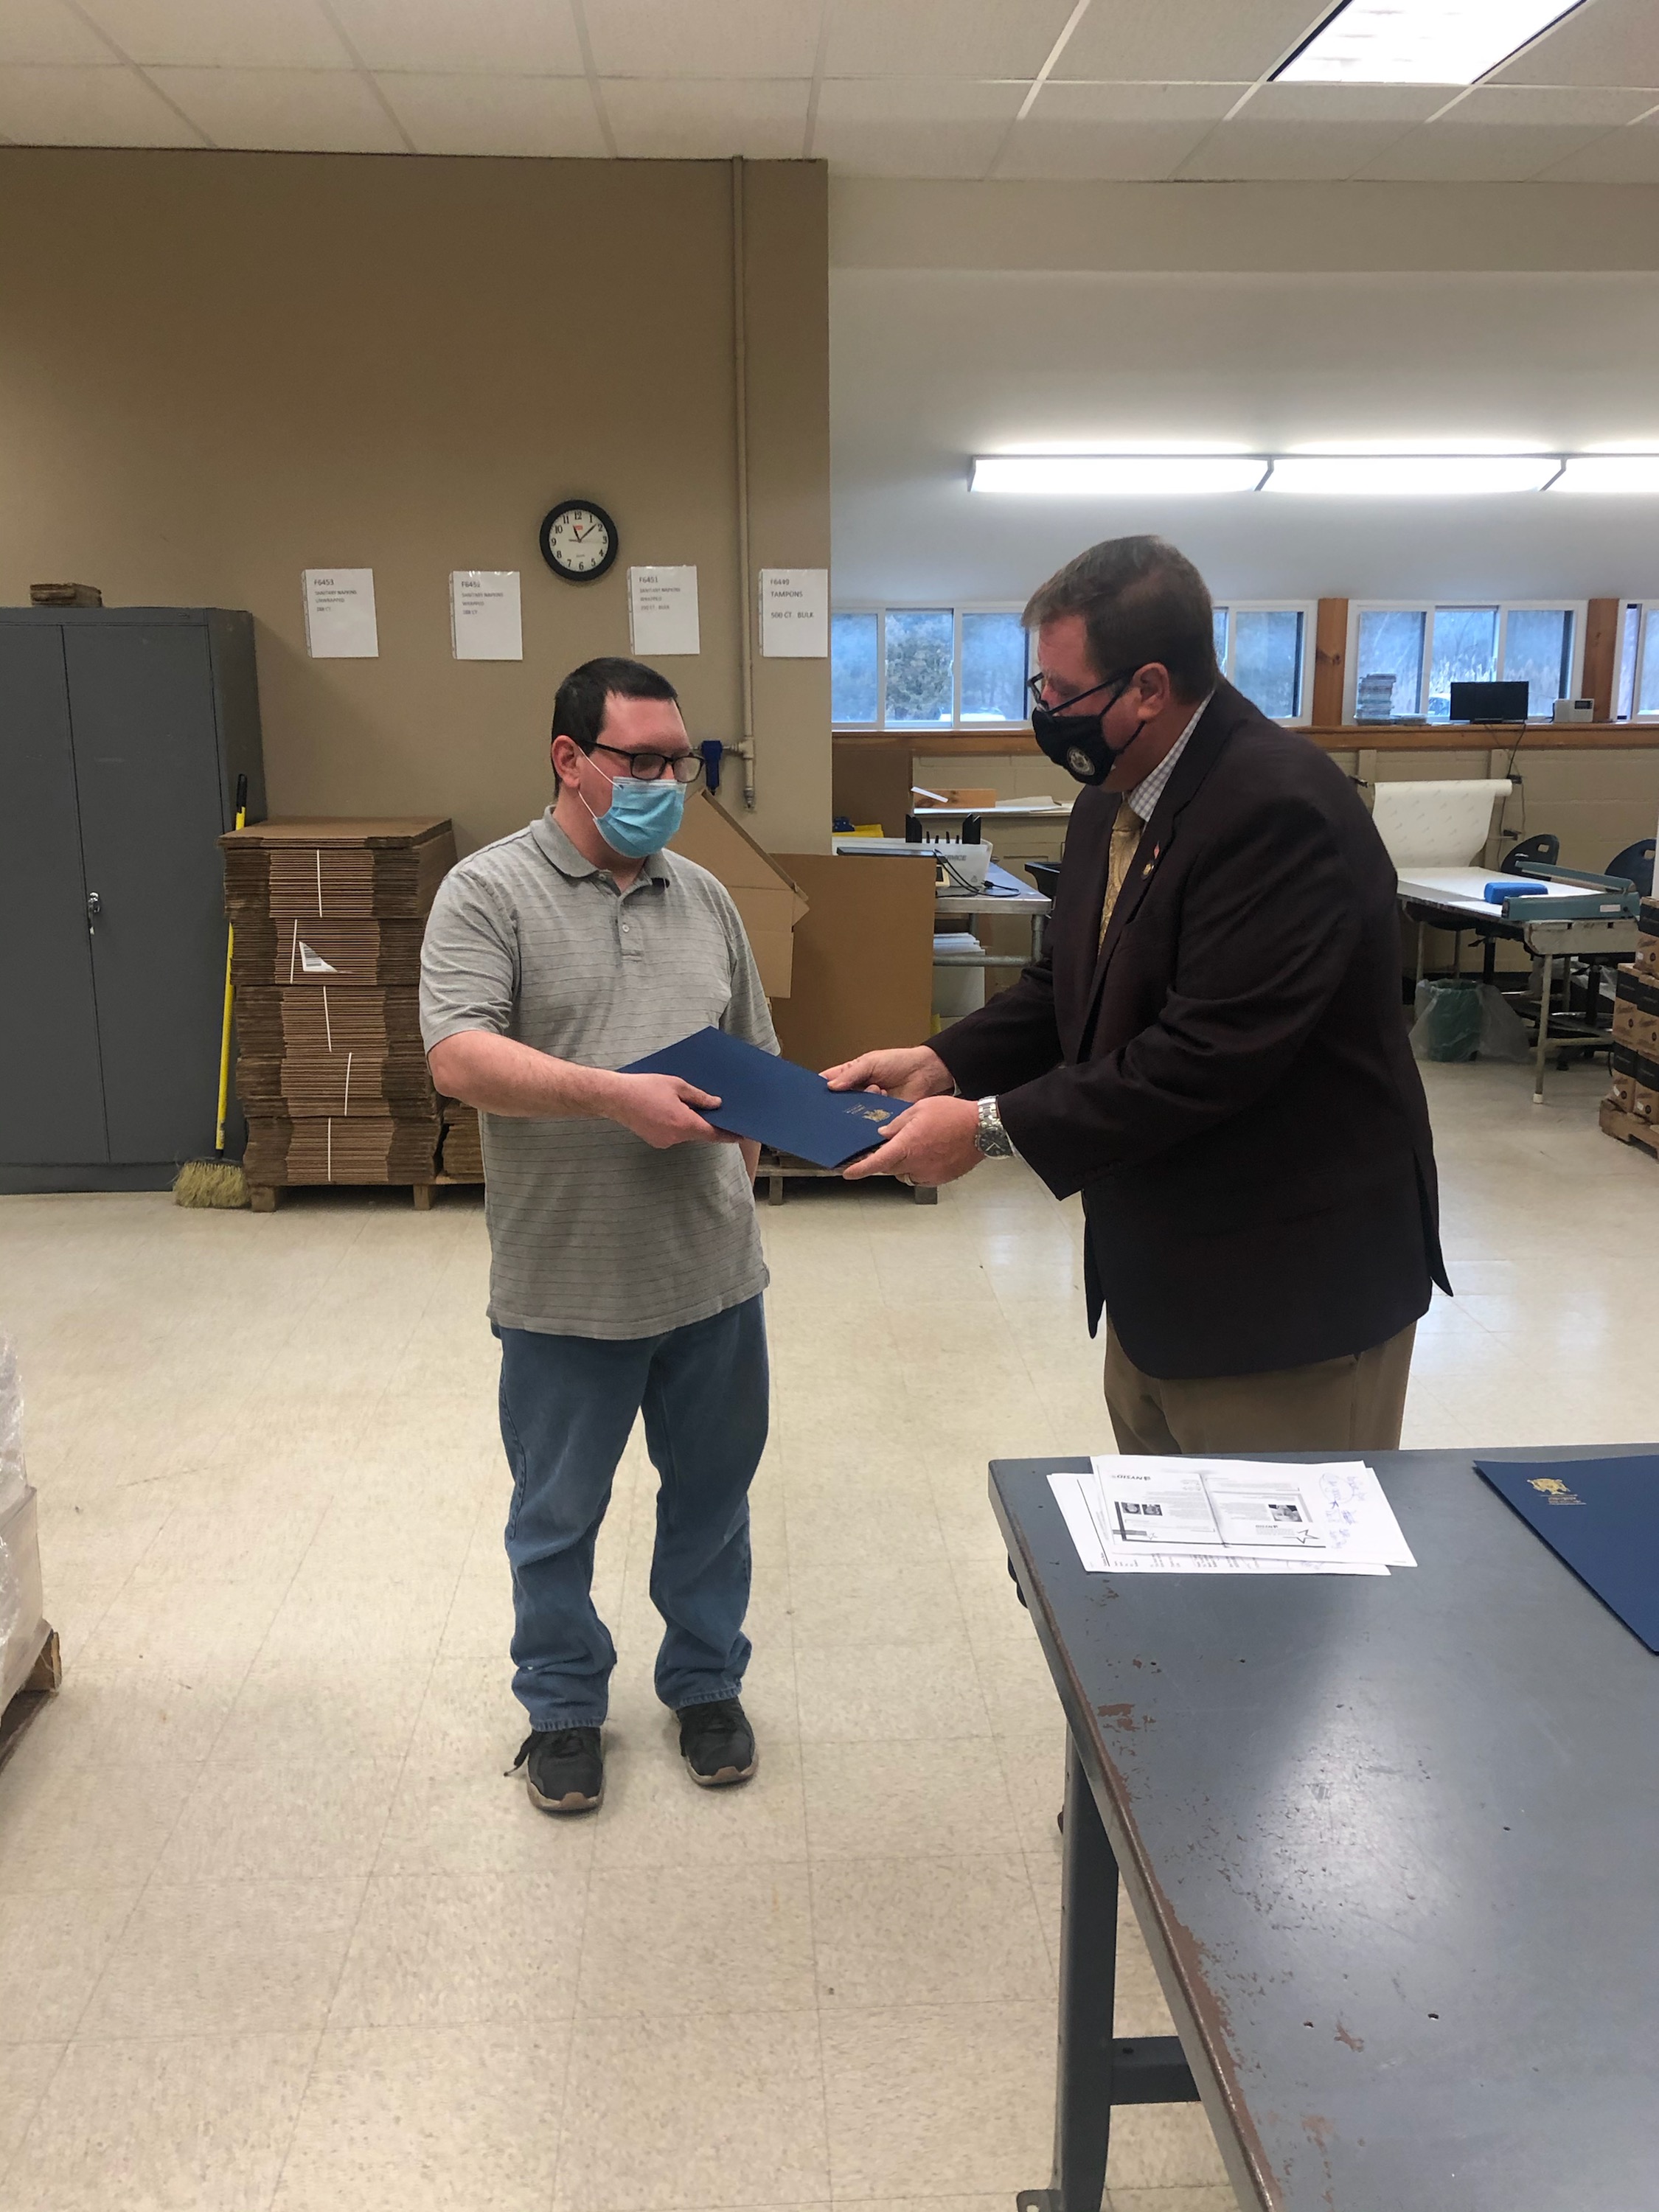 Assemblyman Chris Tague (R,C,I,Ref-Schoharie) went to the Arc Lexington in Schoharie this Tuesday to present Josh Jackson, Ray Trendell, and Chris Stephens with New York State Assembly citations honor